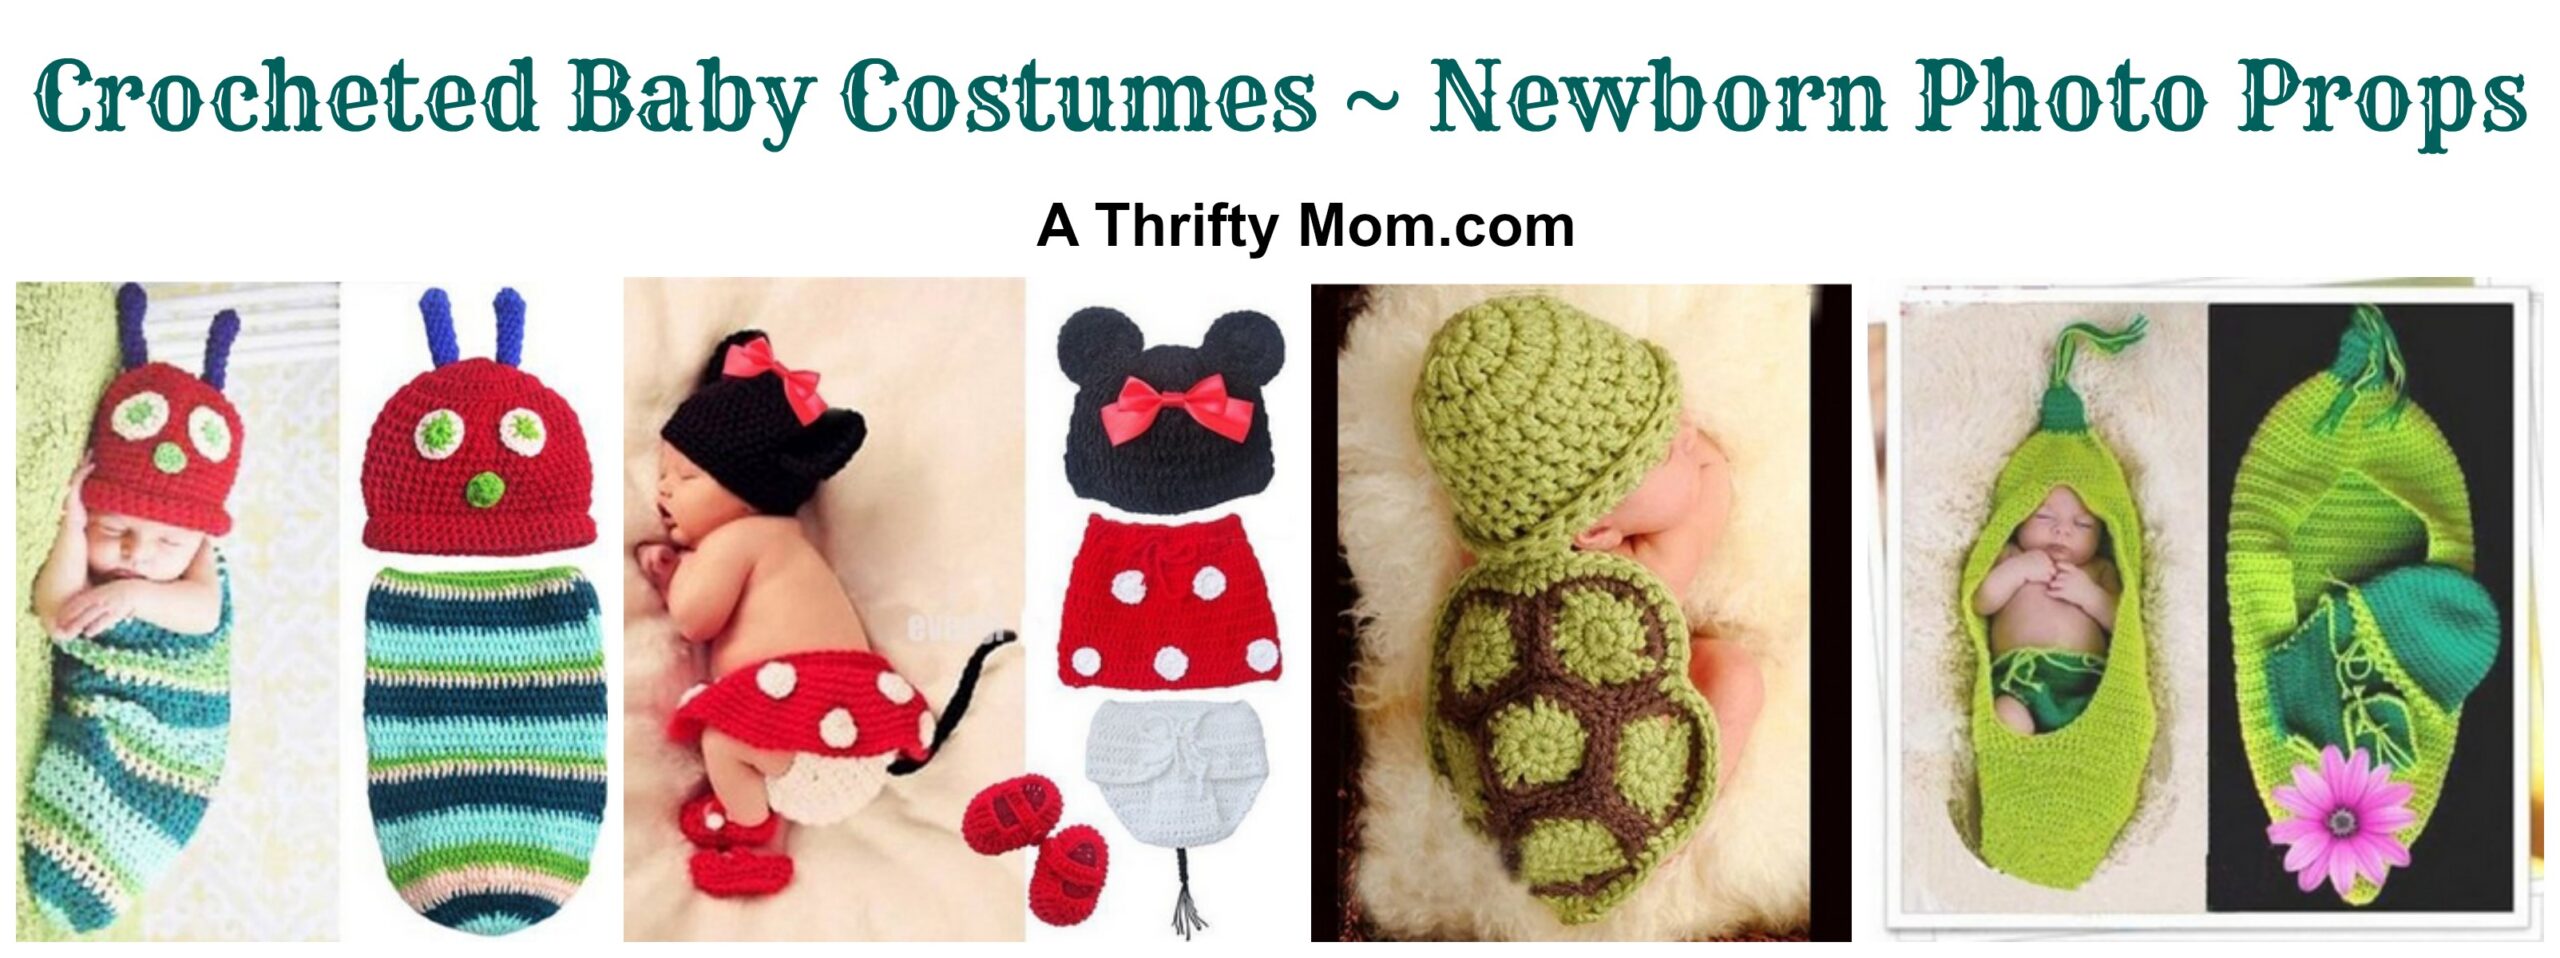 crocheted Baby costumes - A Thrifty Mom